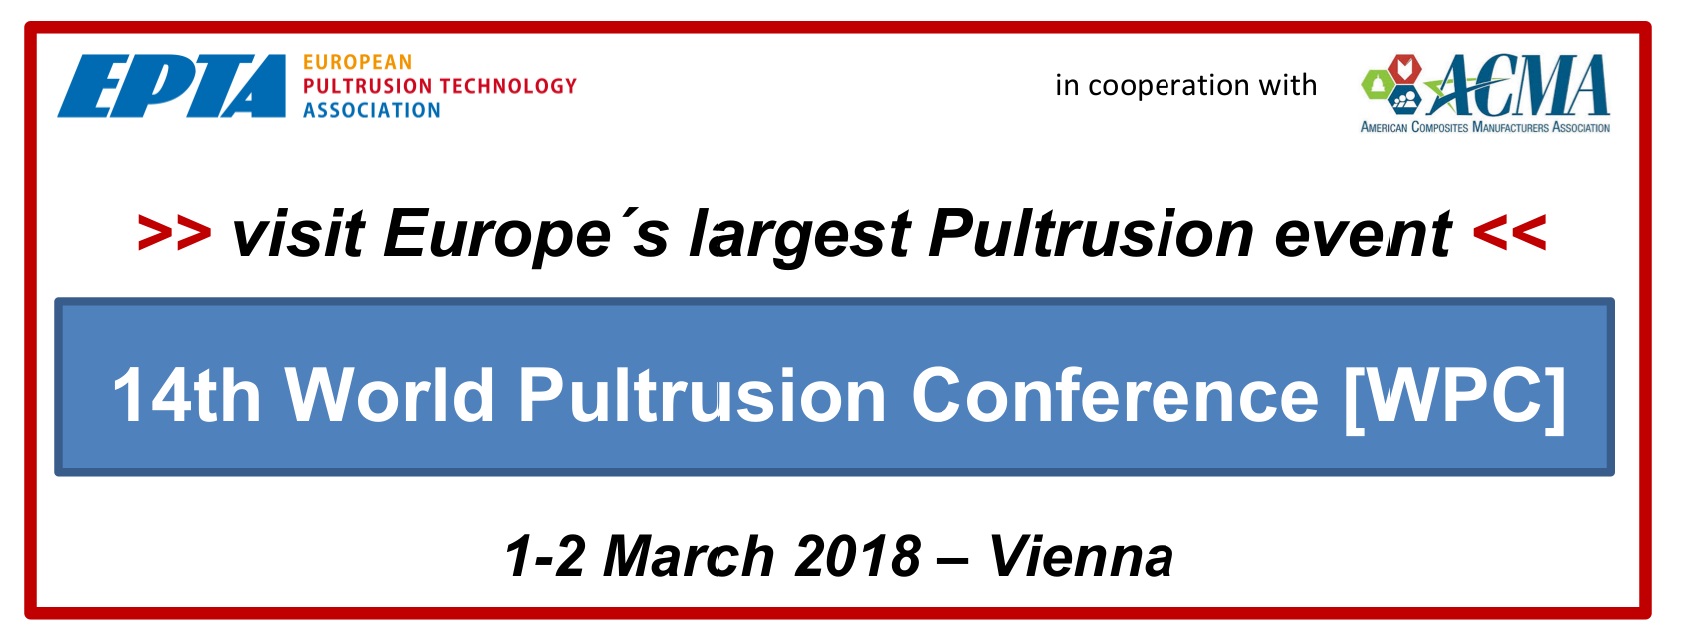 14th World Pultrusion Conference